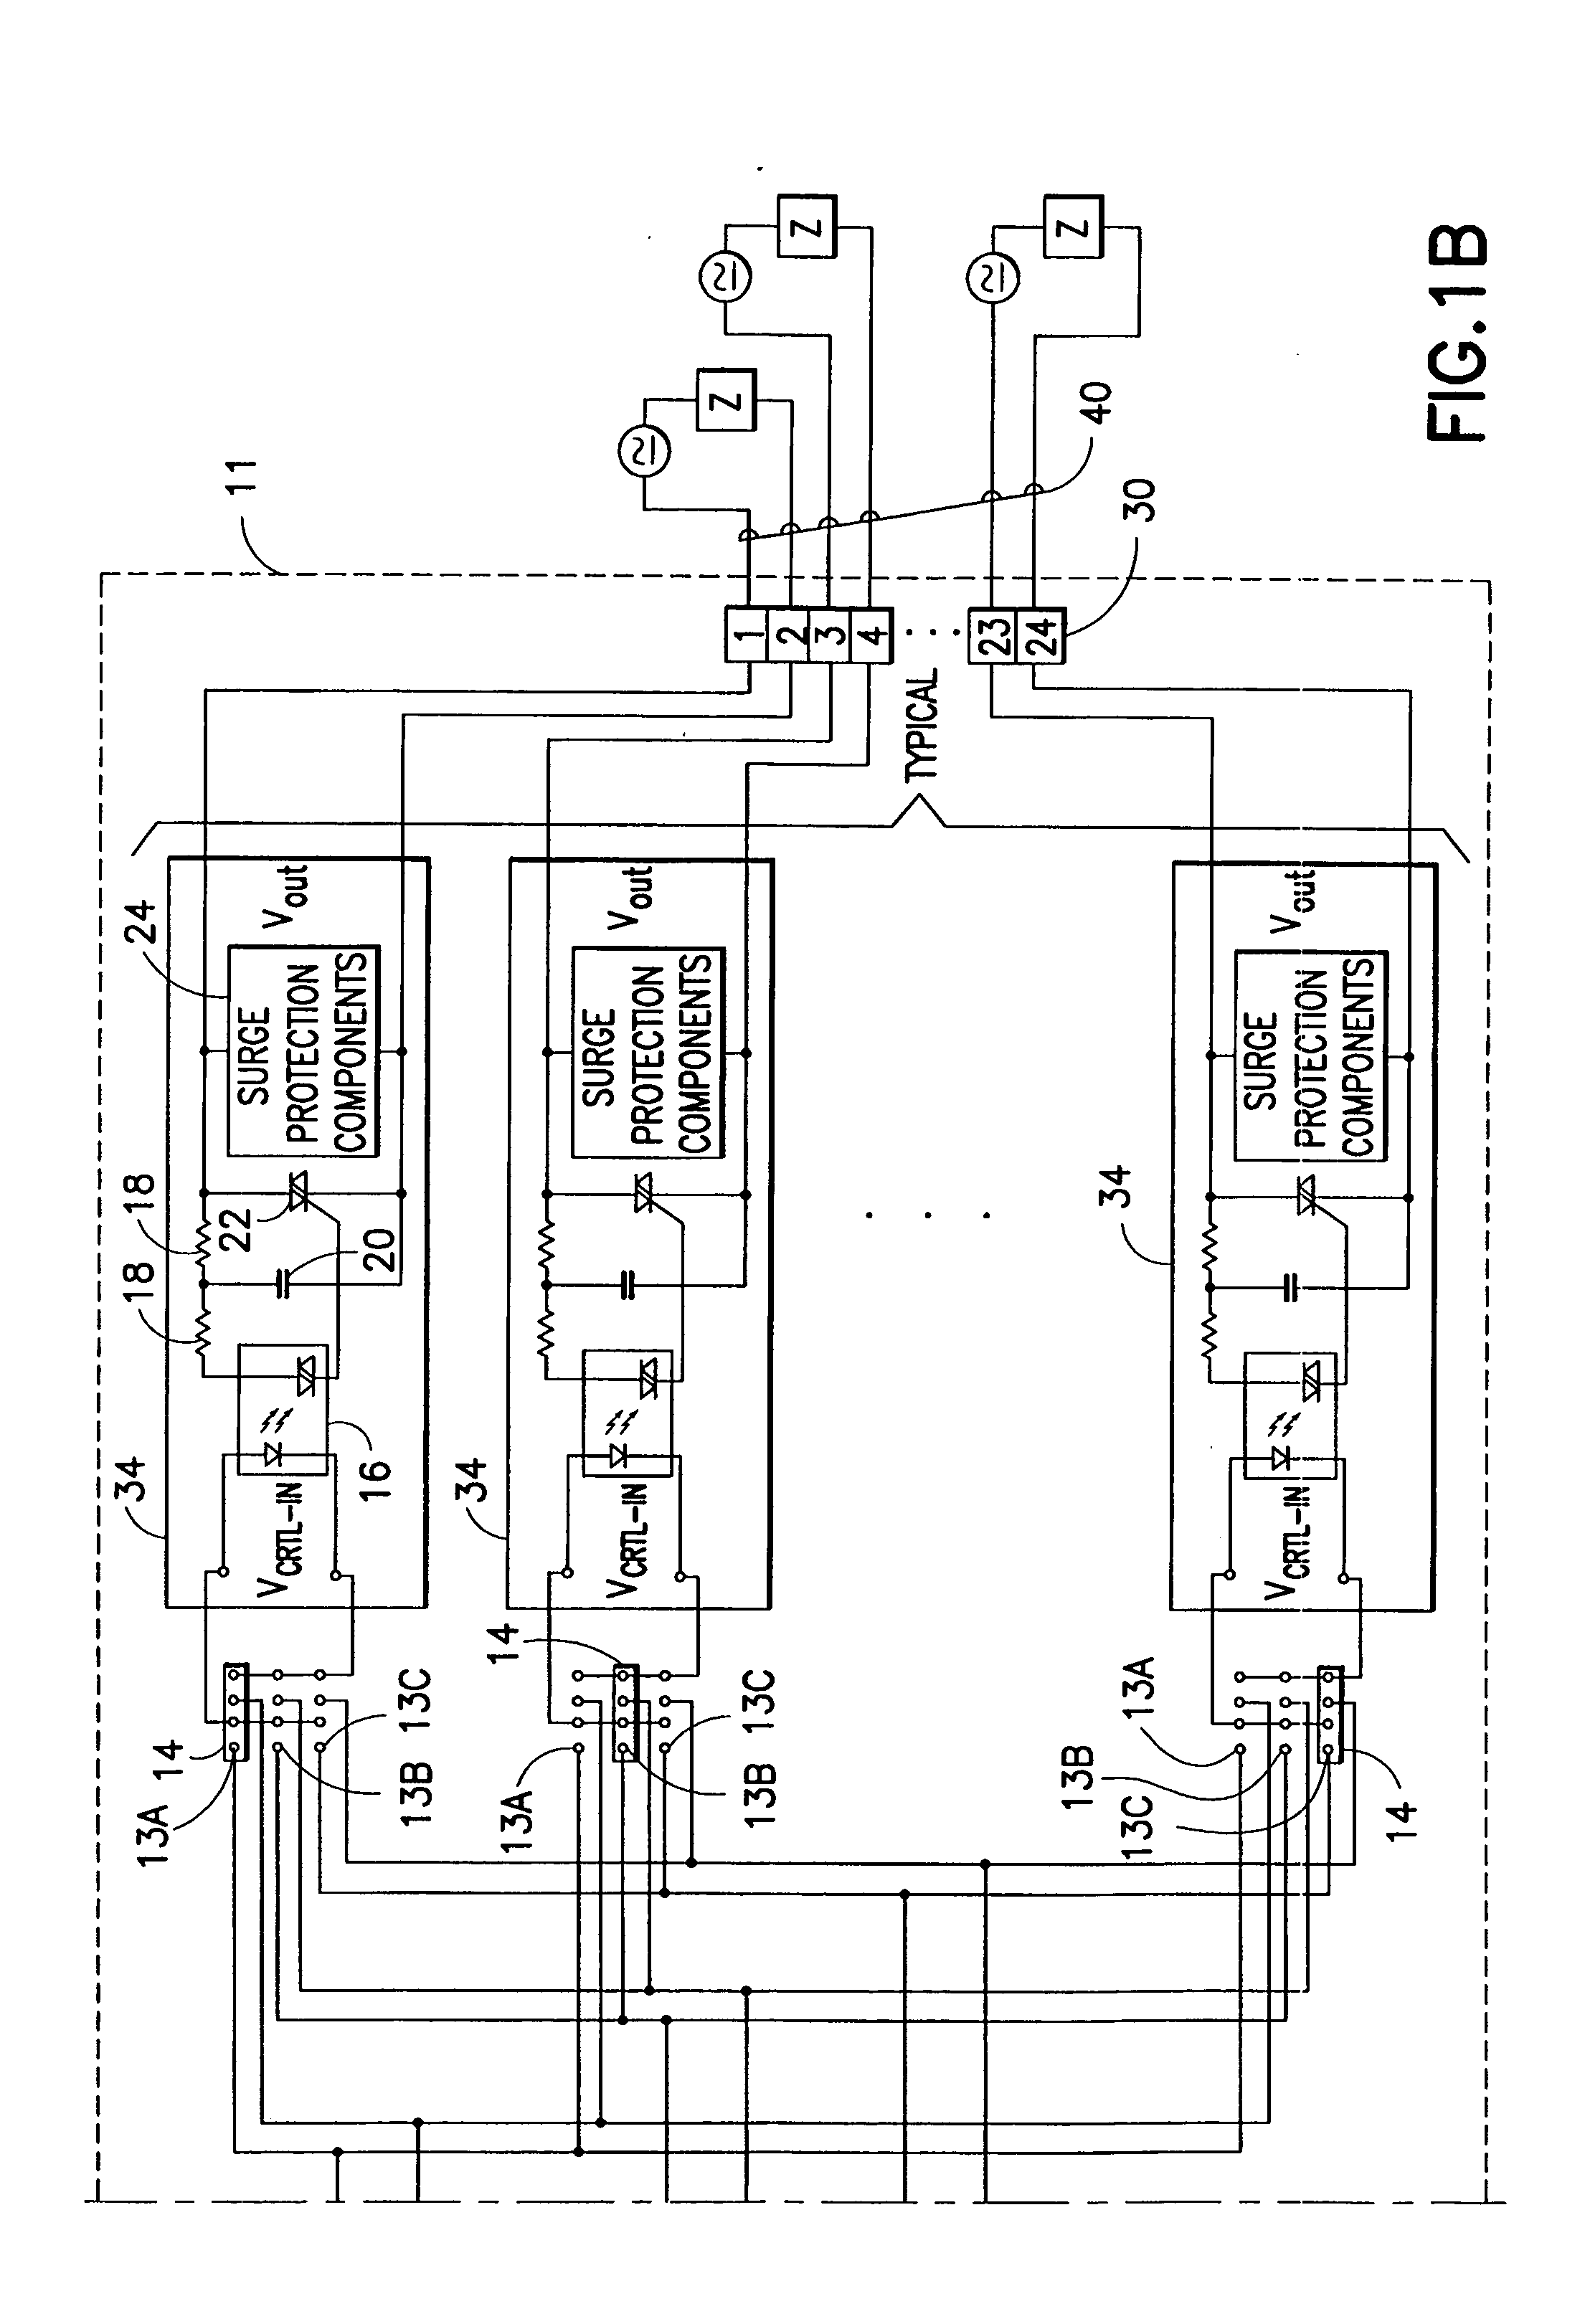 Solid state multi-pole switching device for plug-in switching units